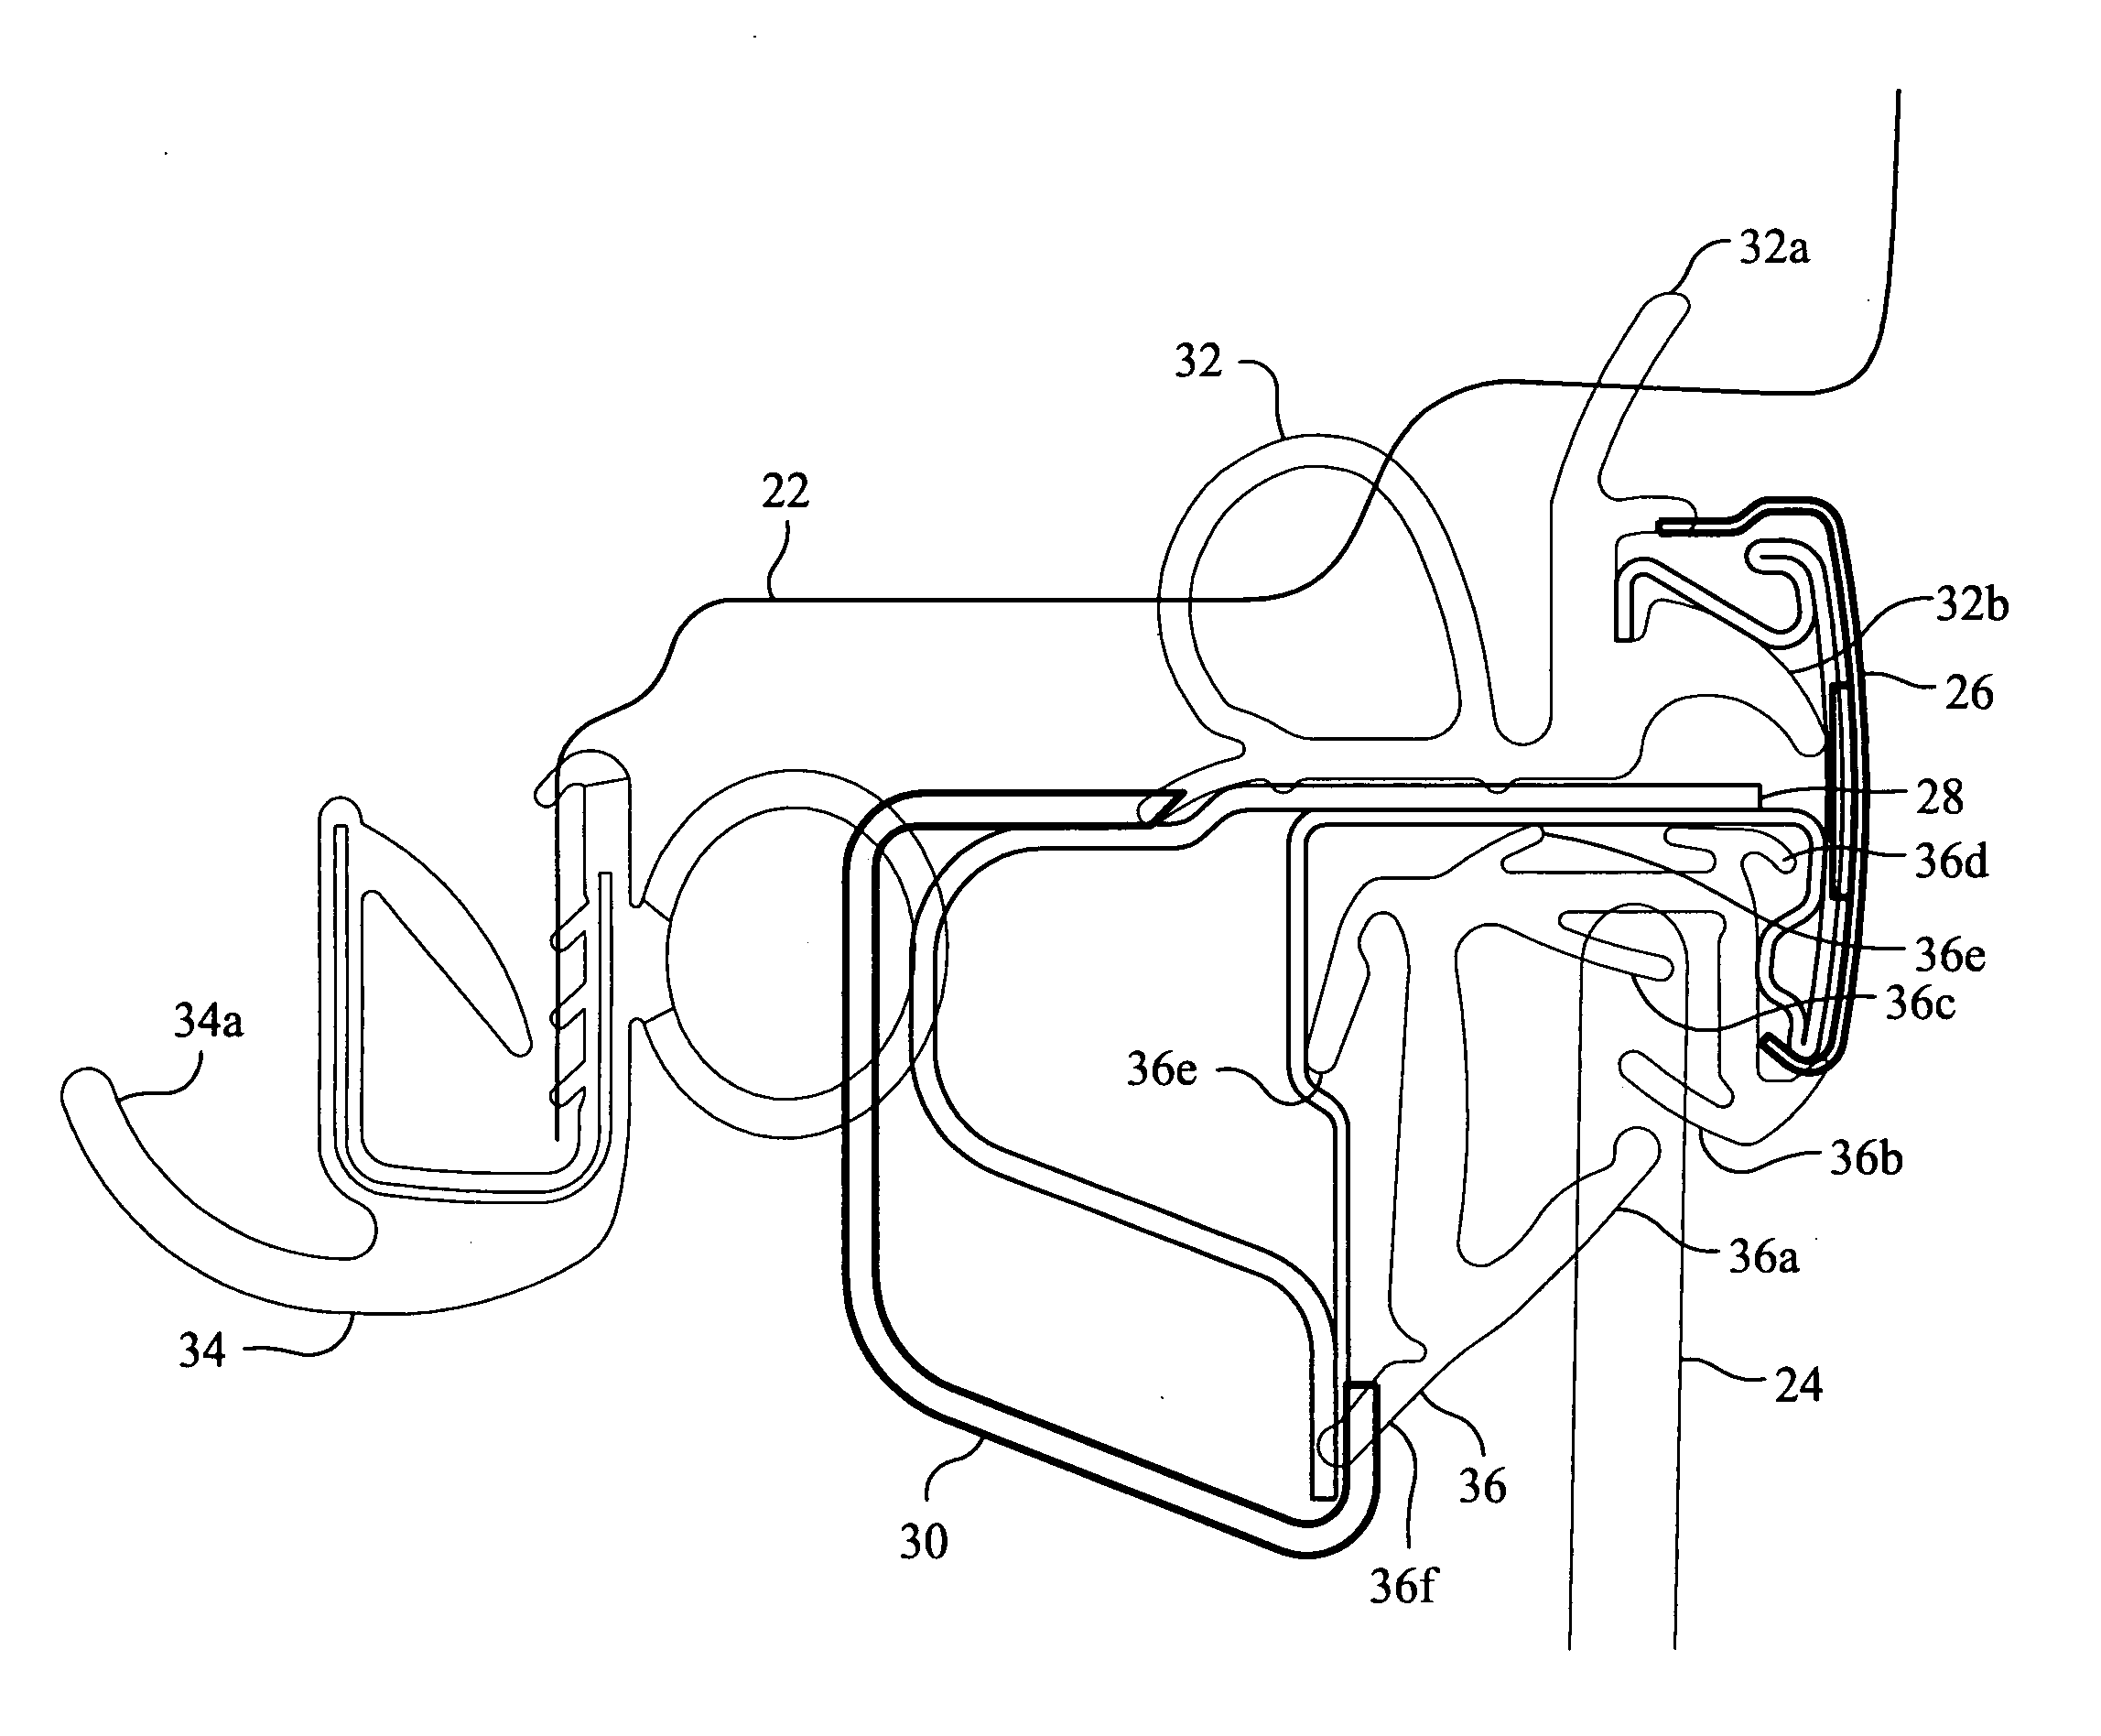 Vehicle seal system, and/or method of making the same